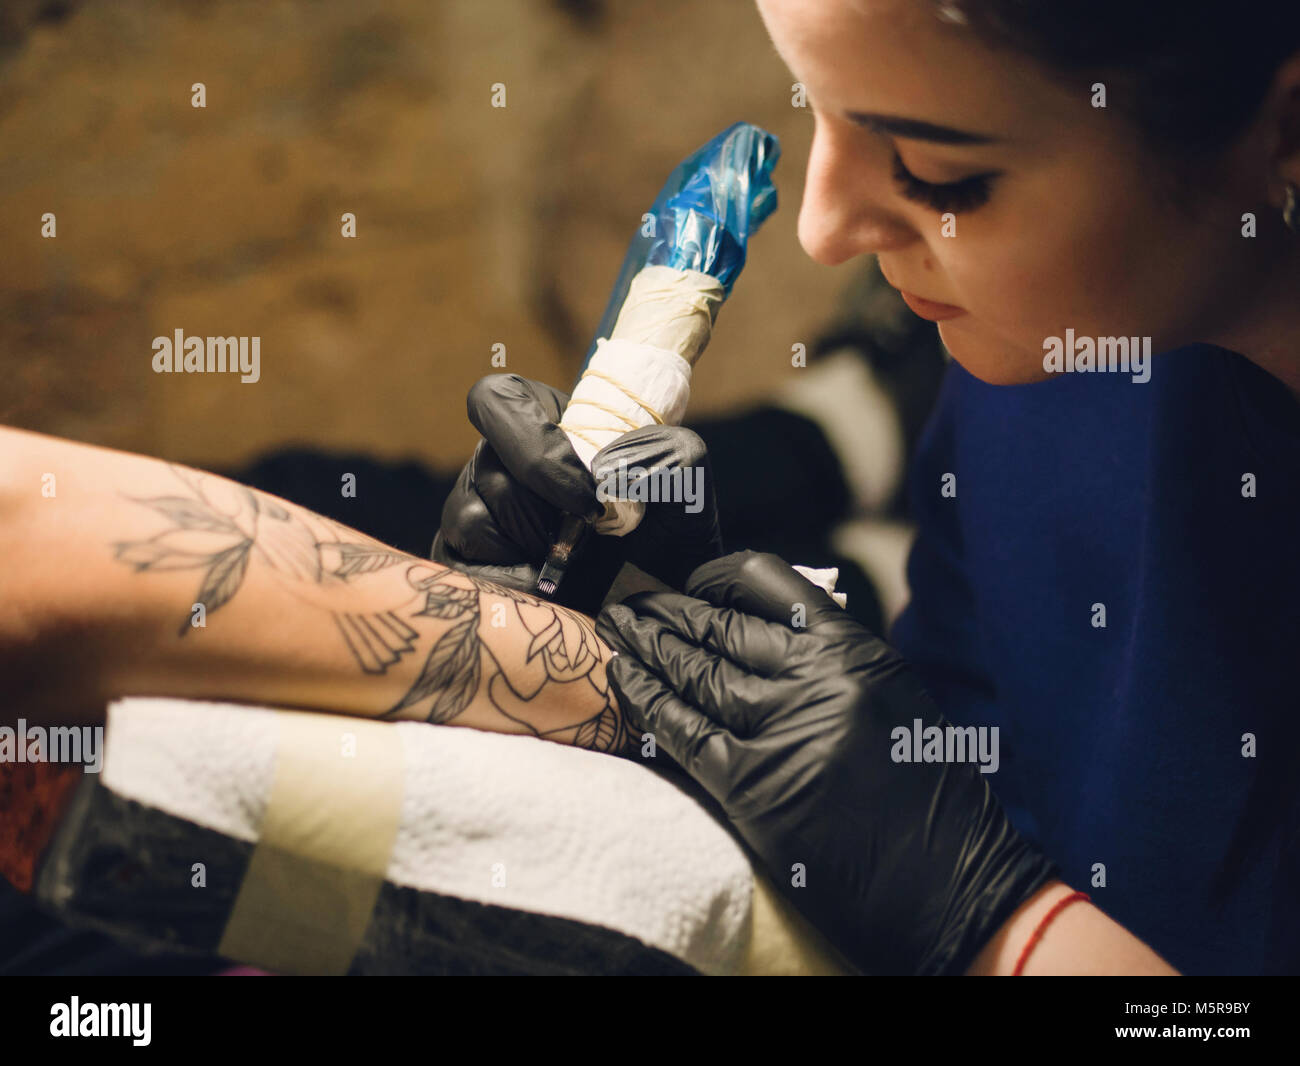 7 Ways to Get Tattoo Ink Out Of Your Clothes